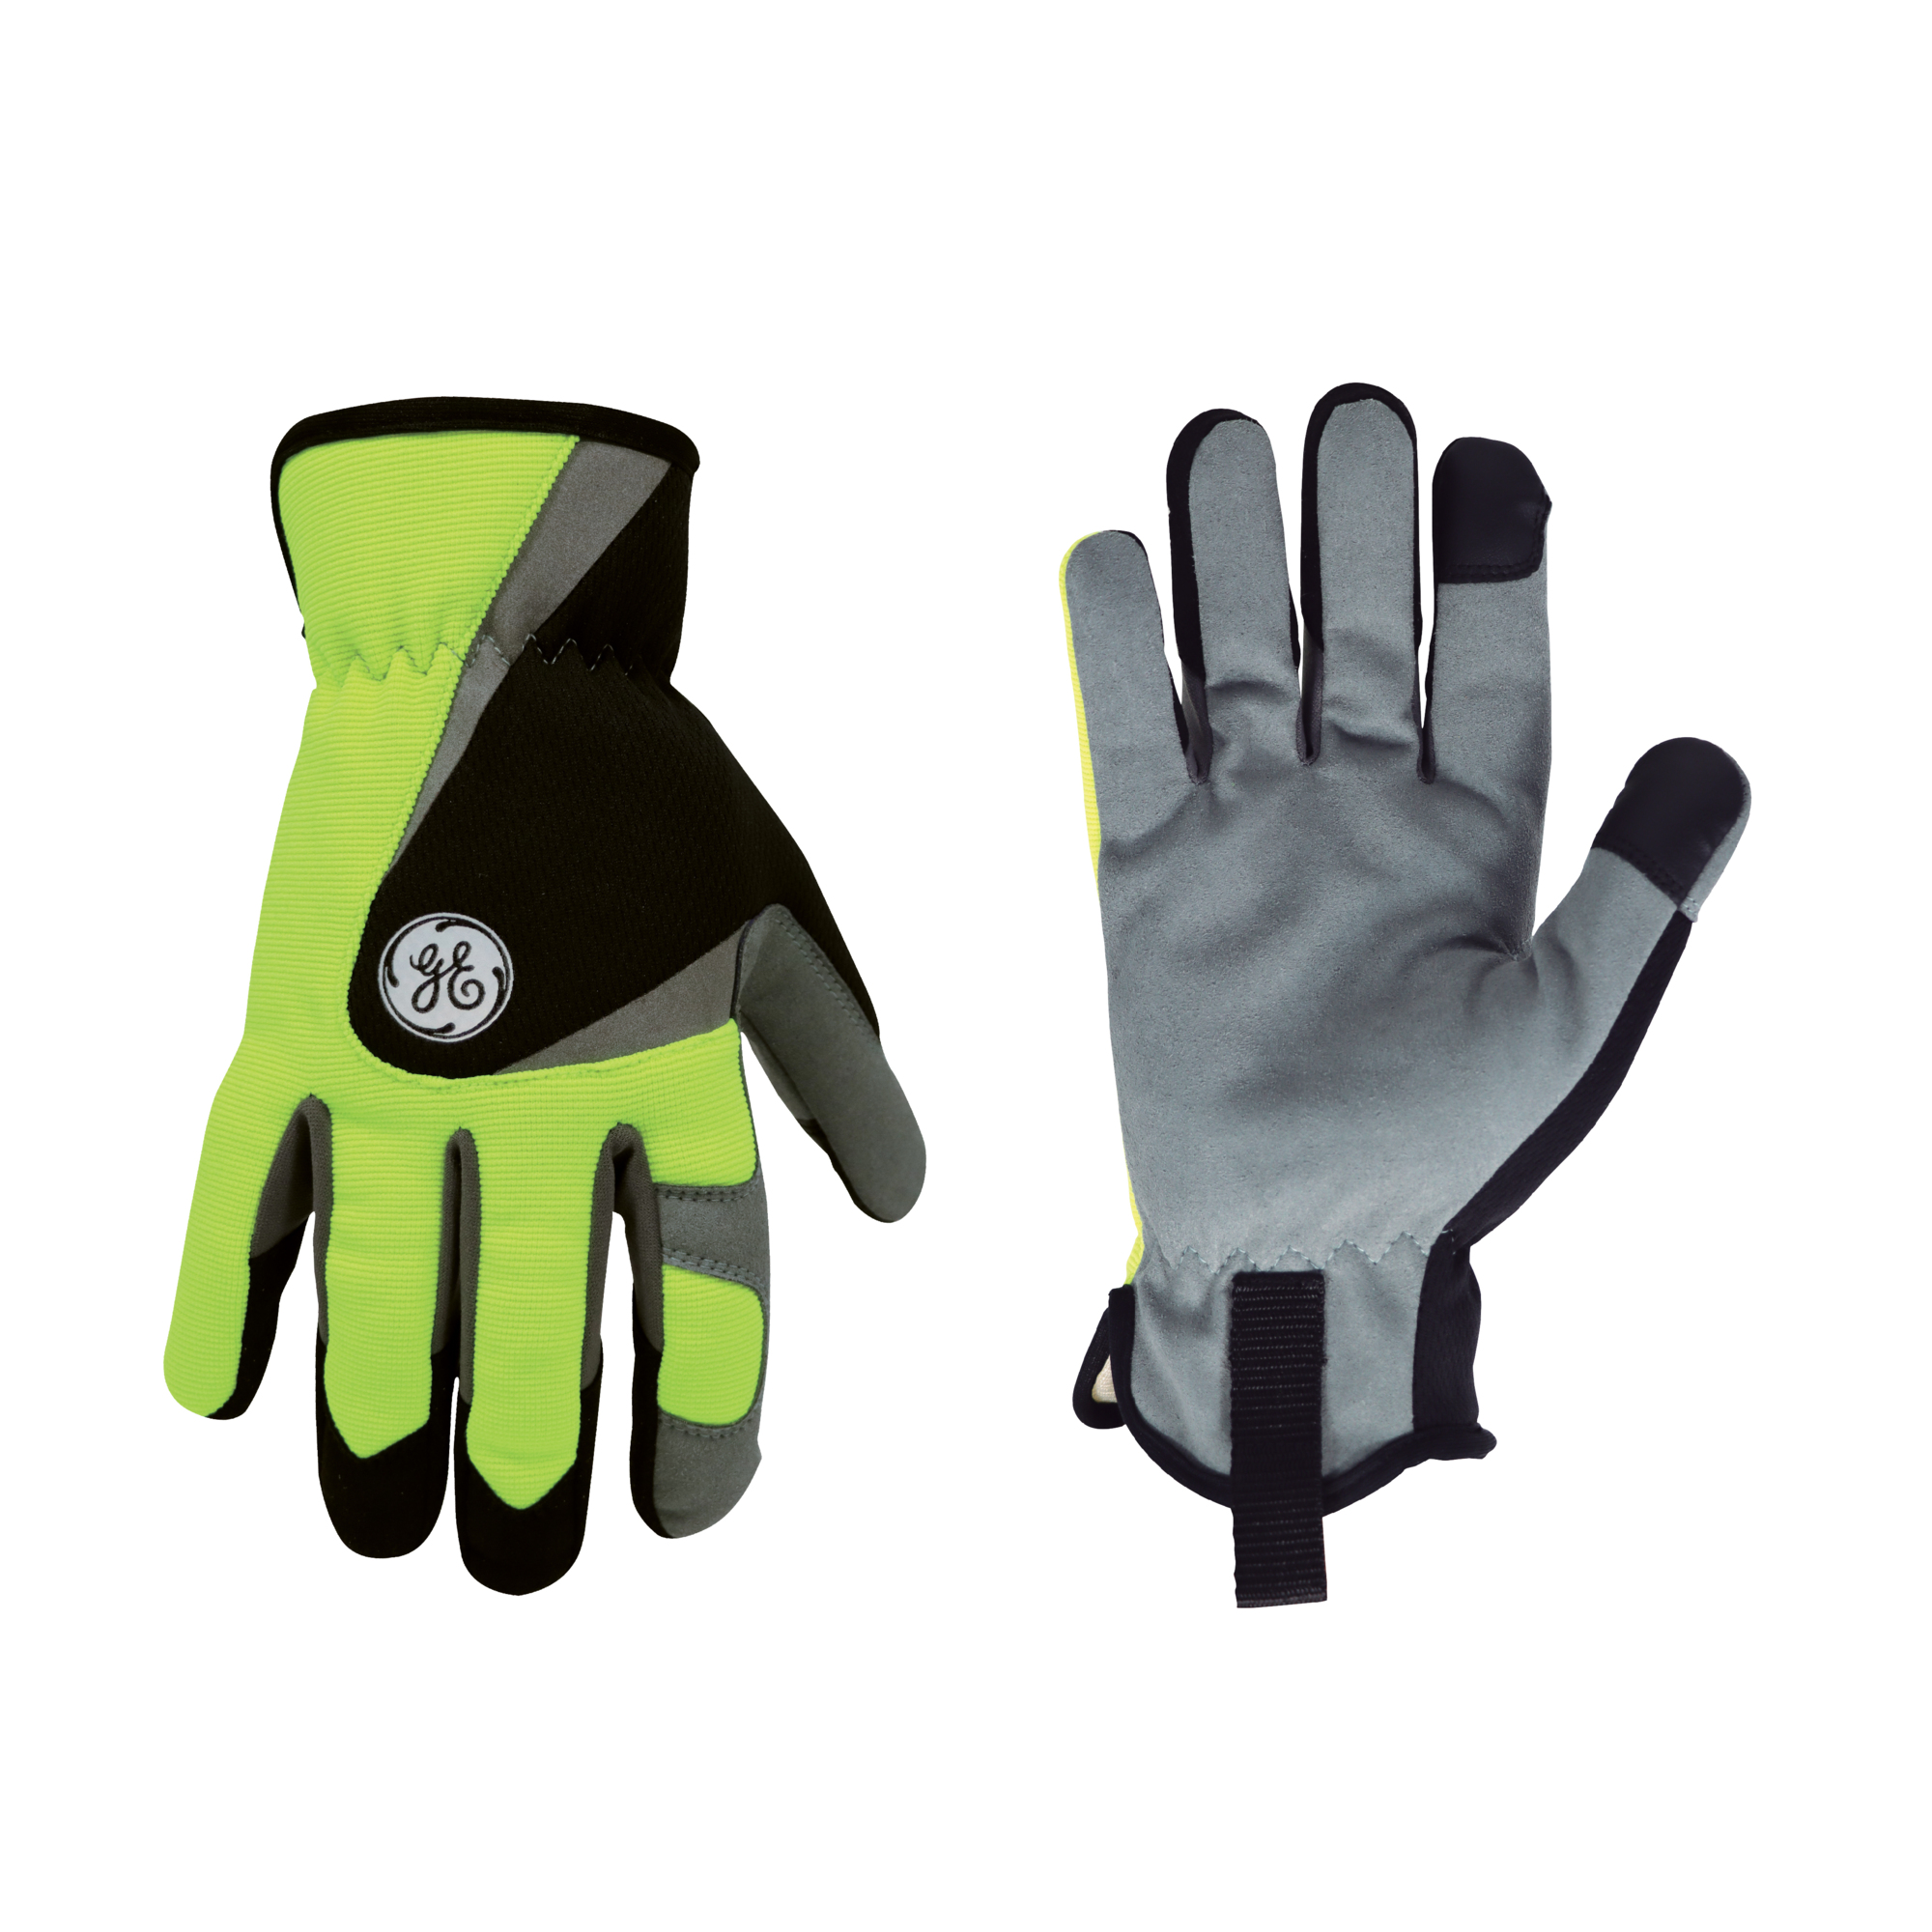 General Electric, Mechanic's Glove High-Vis Green L 1 pair, Size L, Included (qty.) 1, Model GG402LC